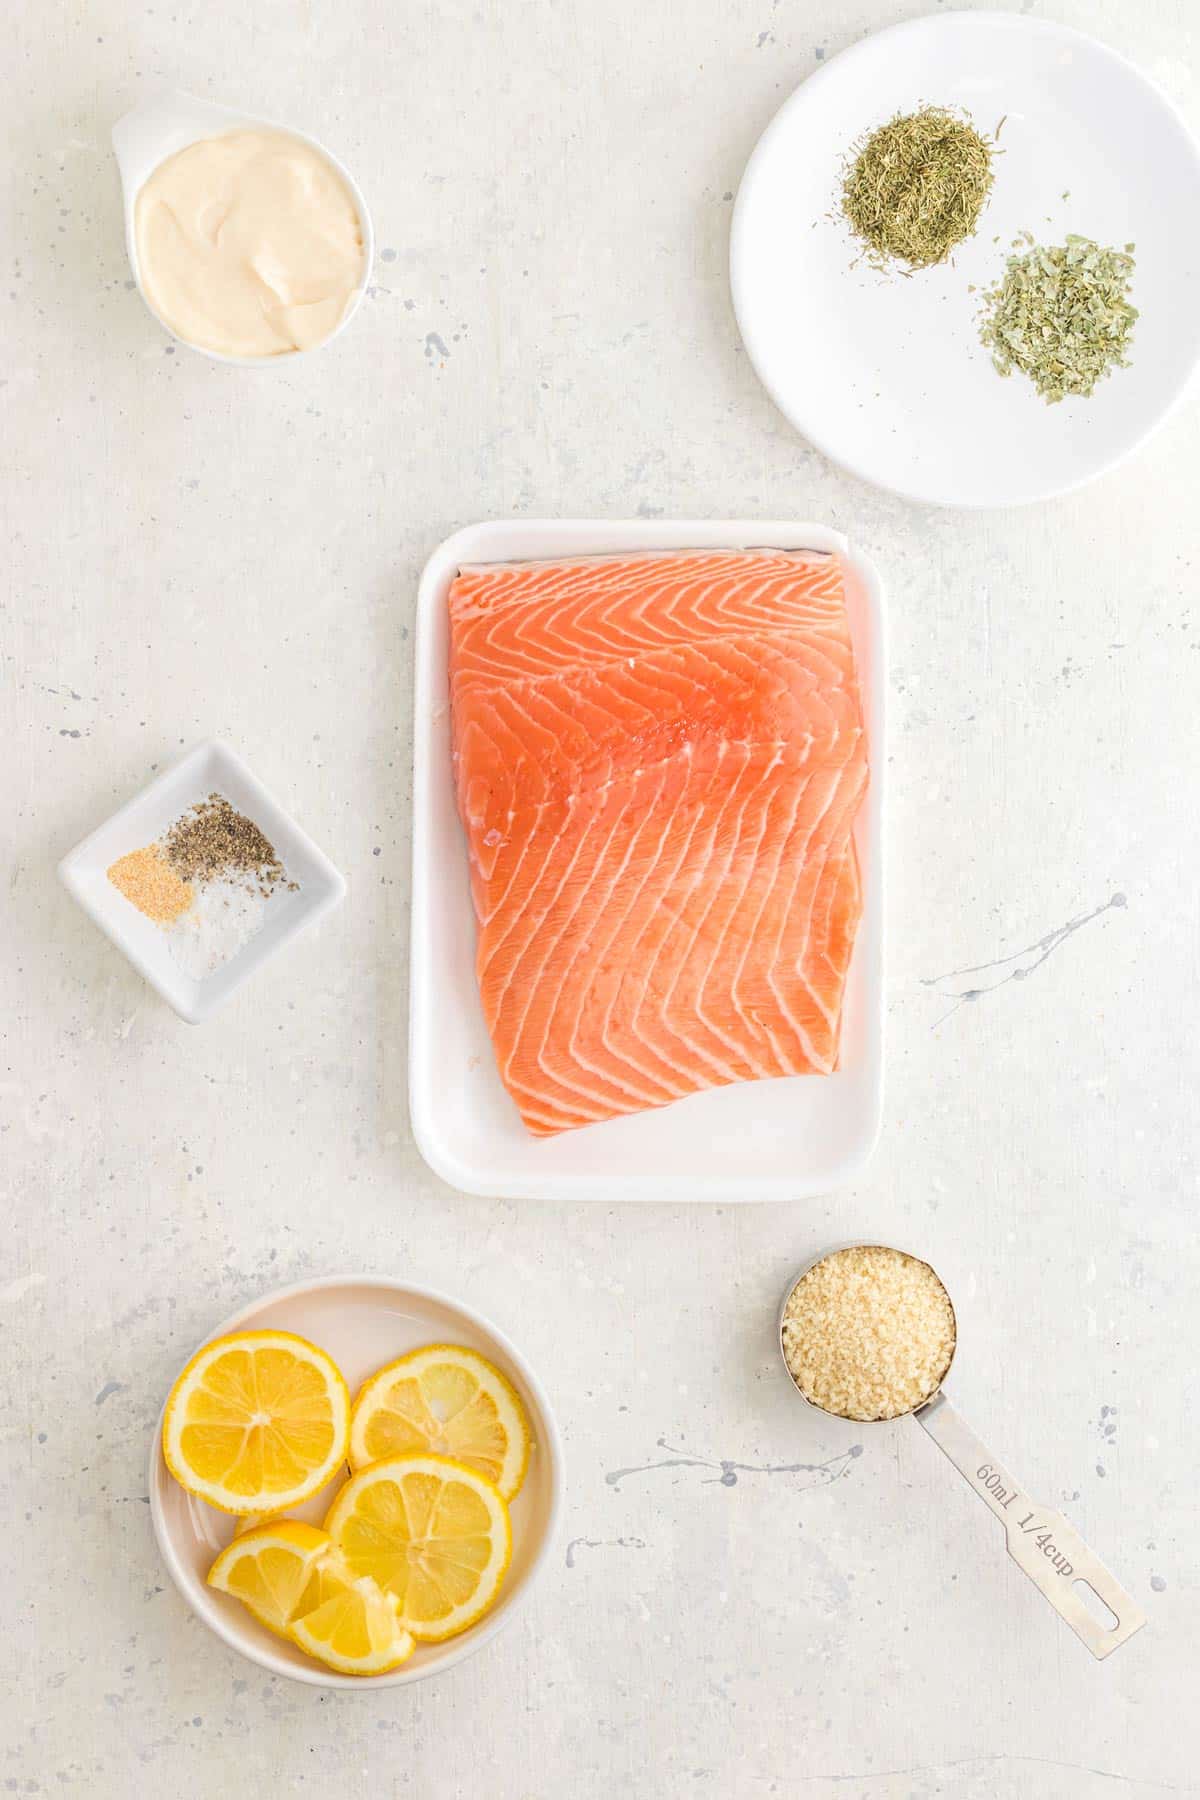 ingredients for baked salmon.